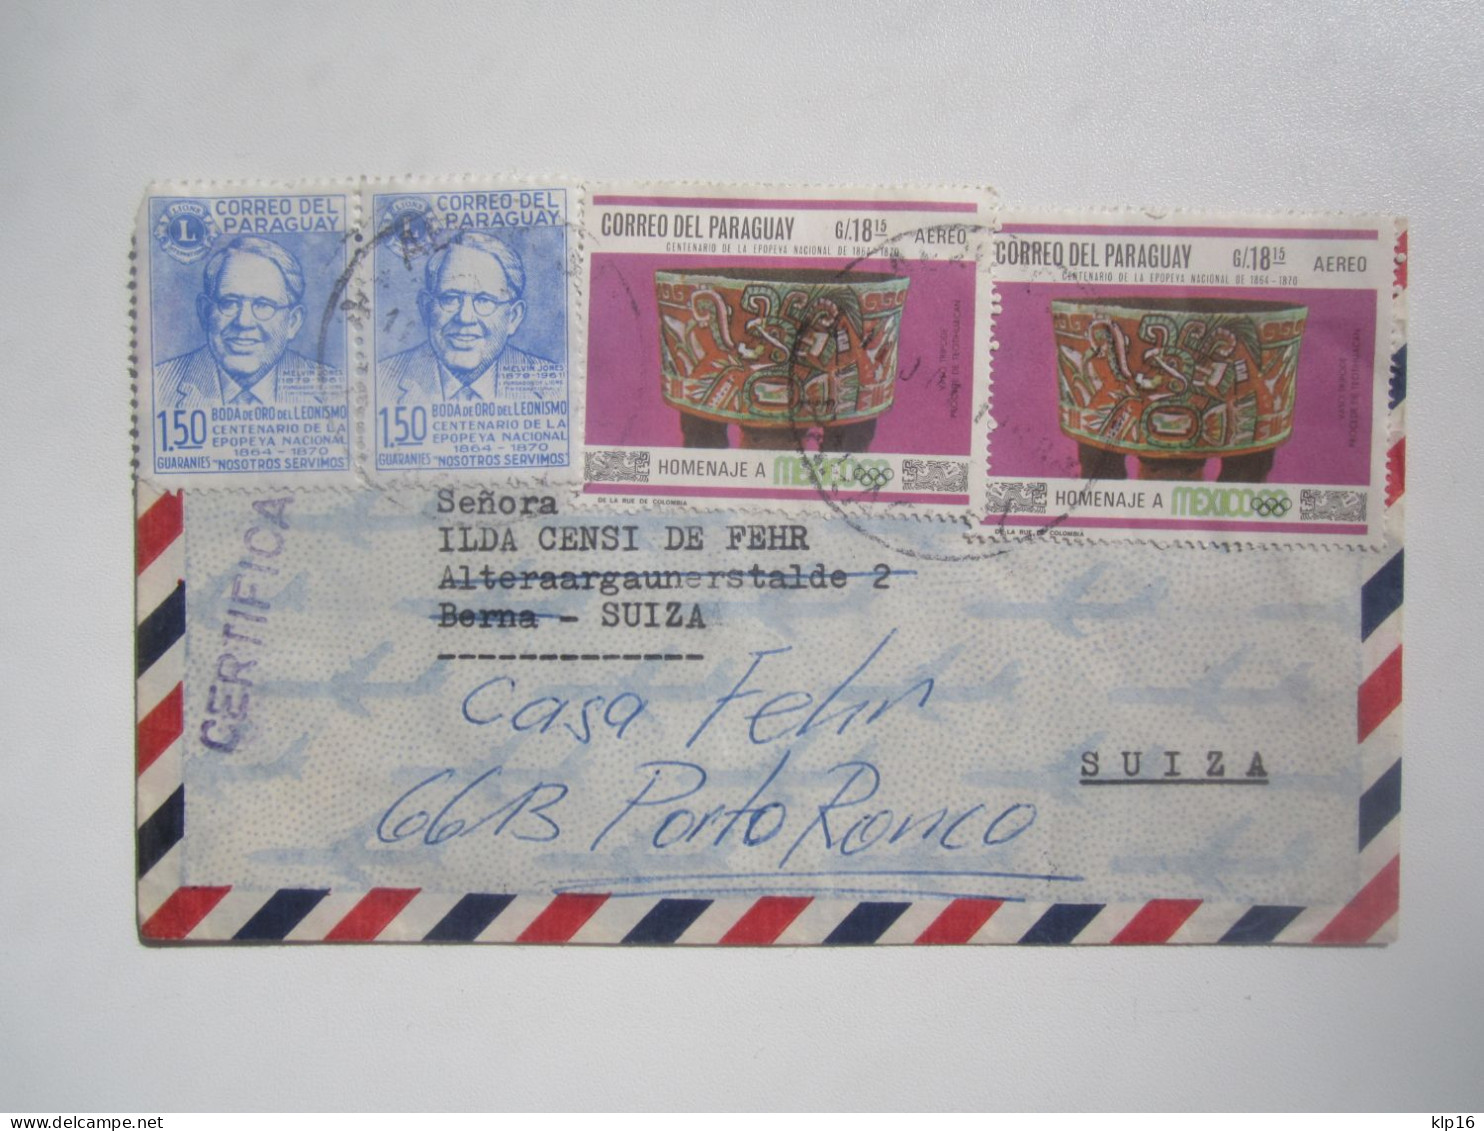 1968 PARAGUAY REGISTERED COVER - Paraguay